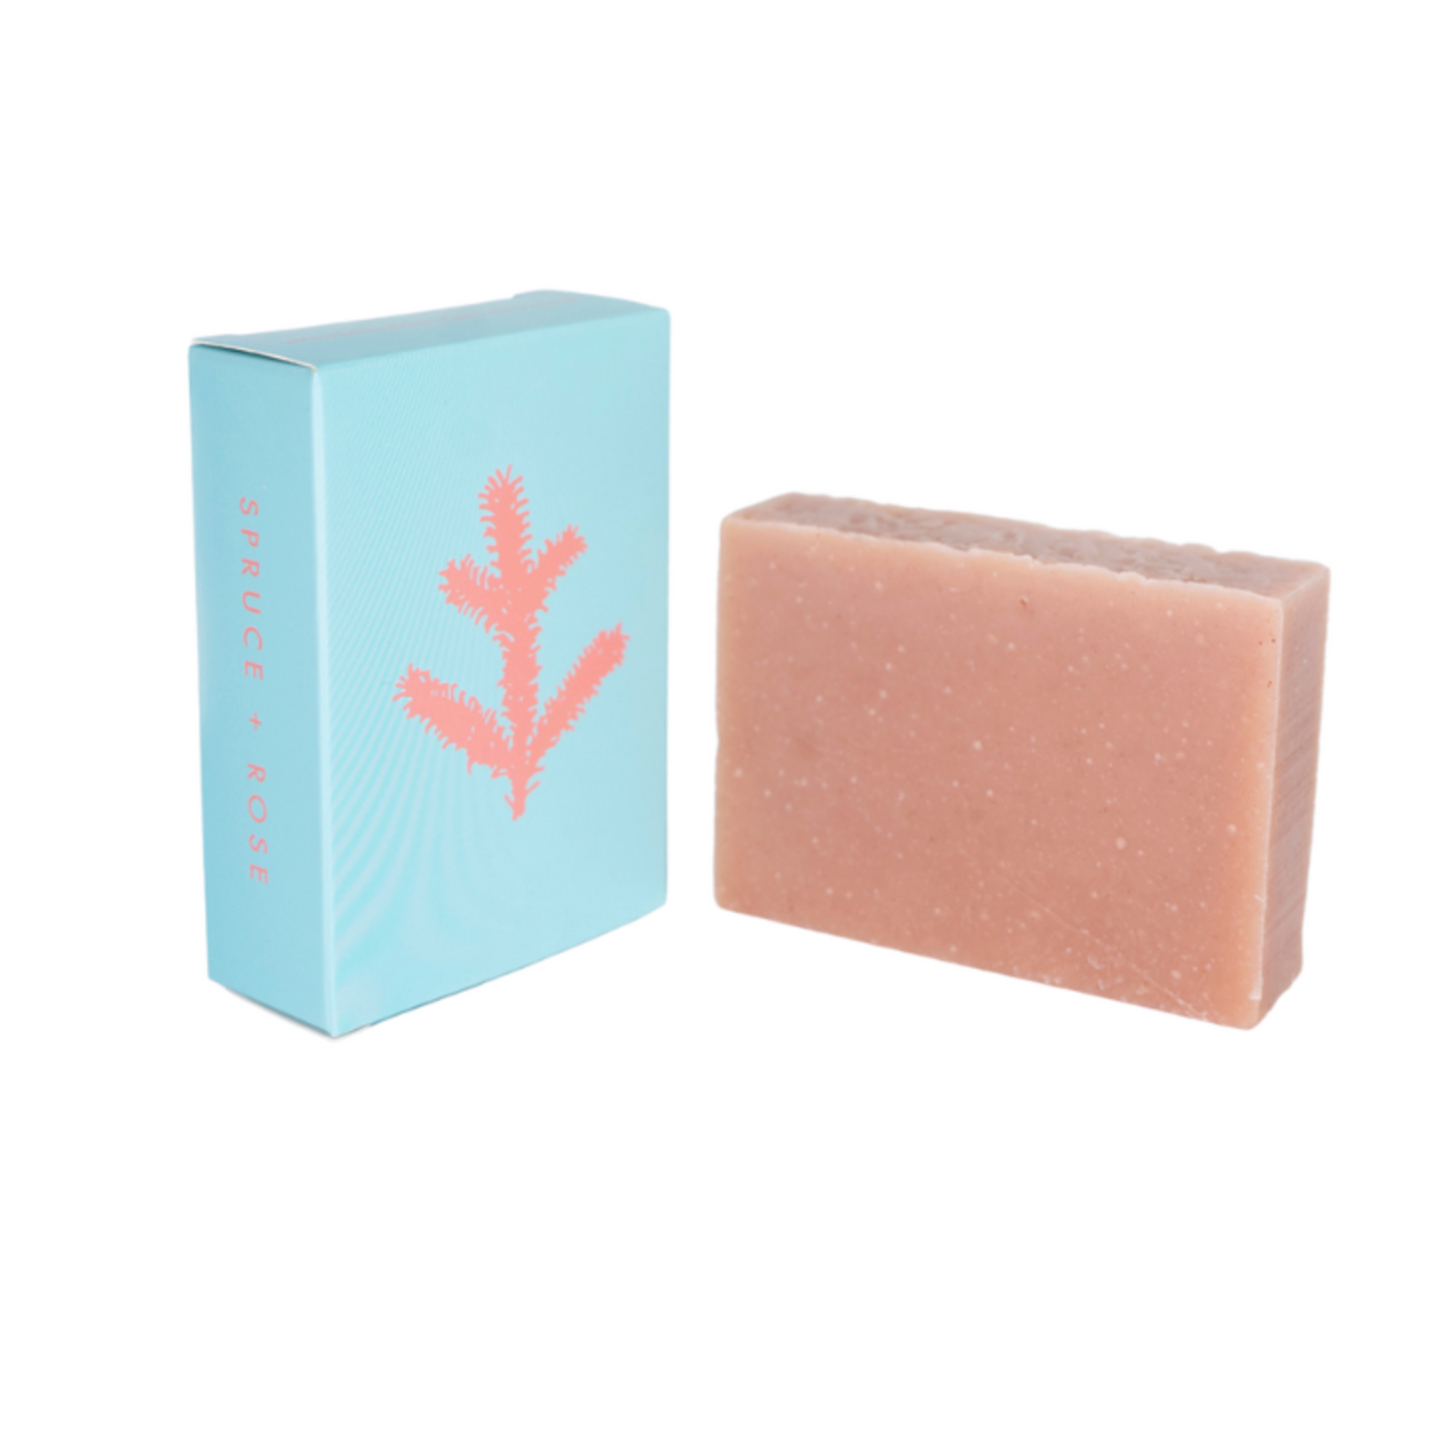 Primary Image of ALTR Spruce and Rose Soap Bar (120 g)